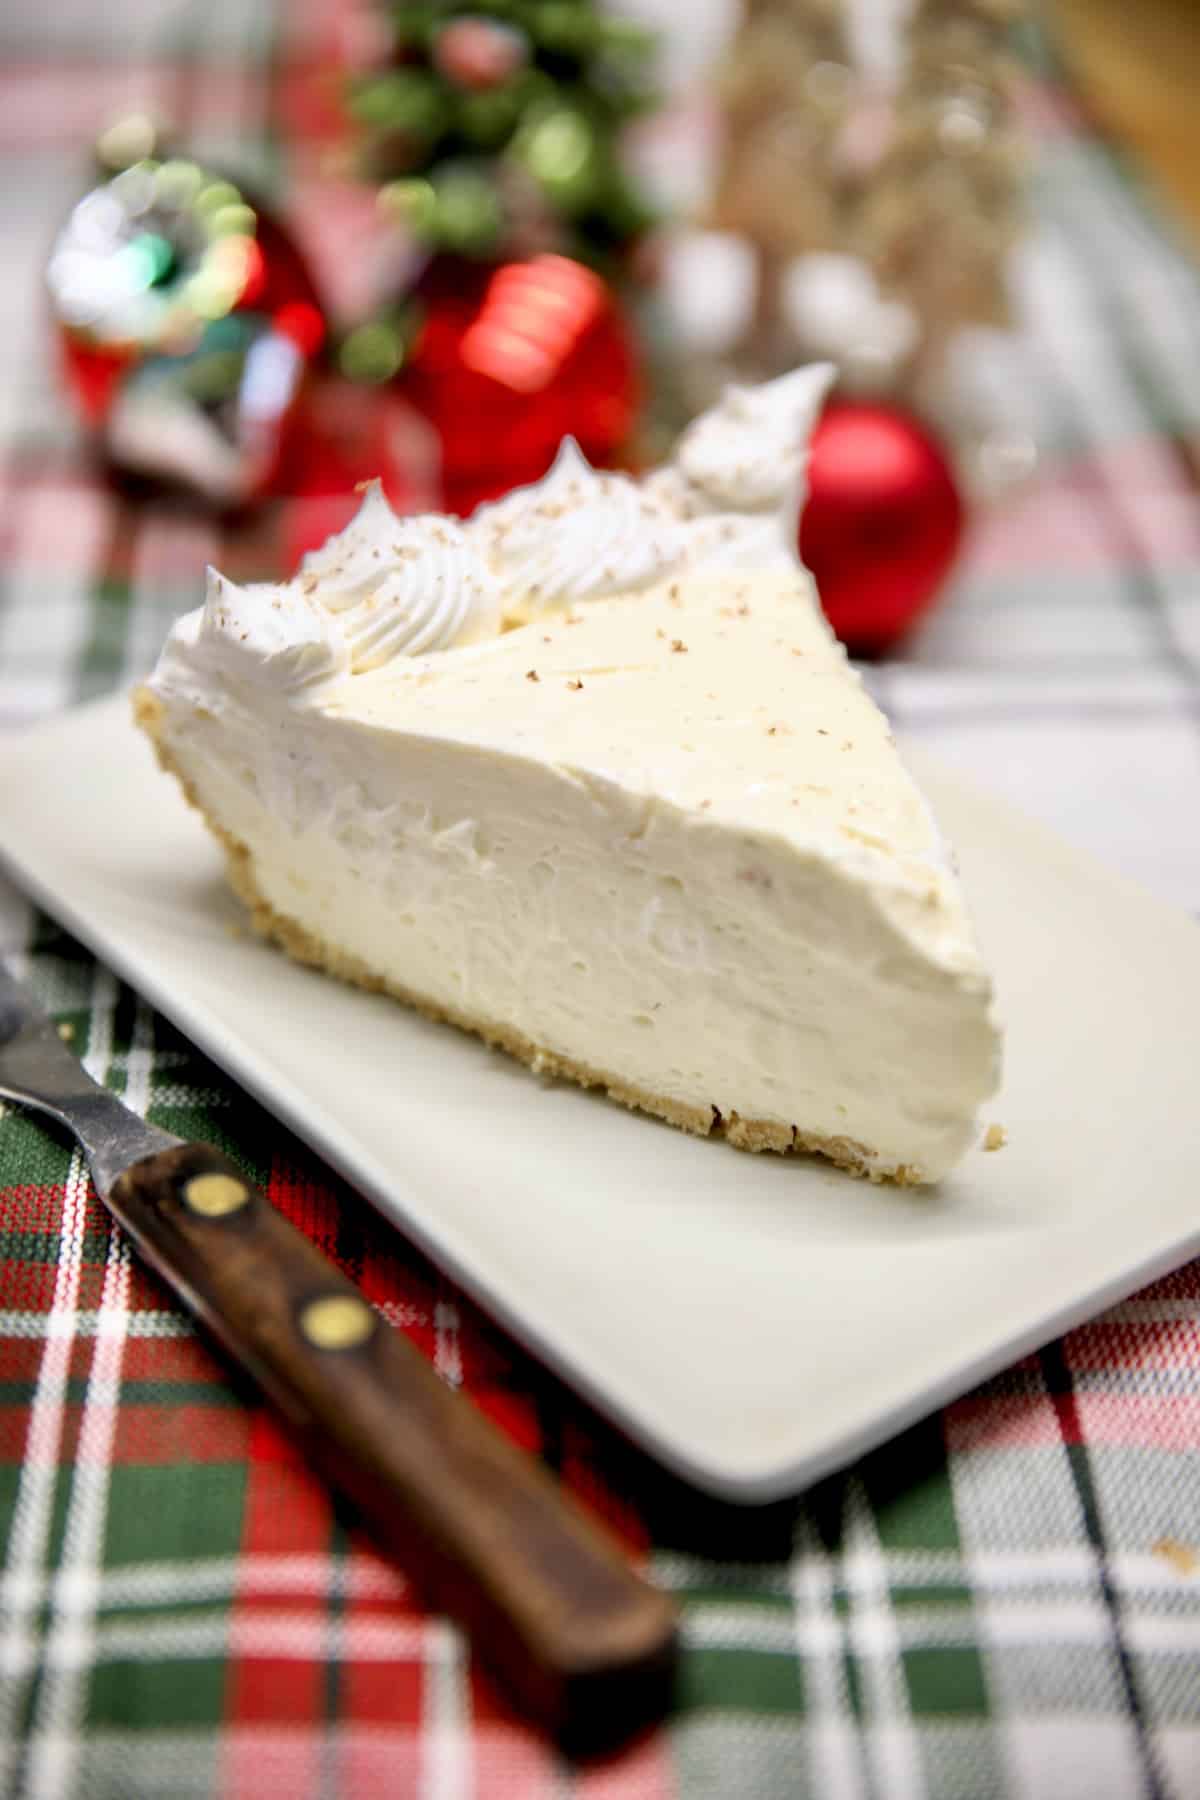 Slice of eggnog cheesecake on a plate, fork & Christmas decorations around the plate.